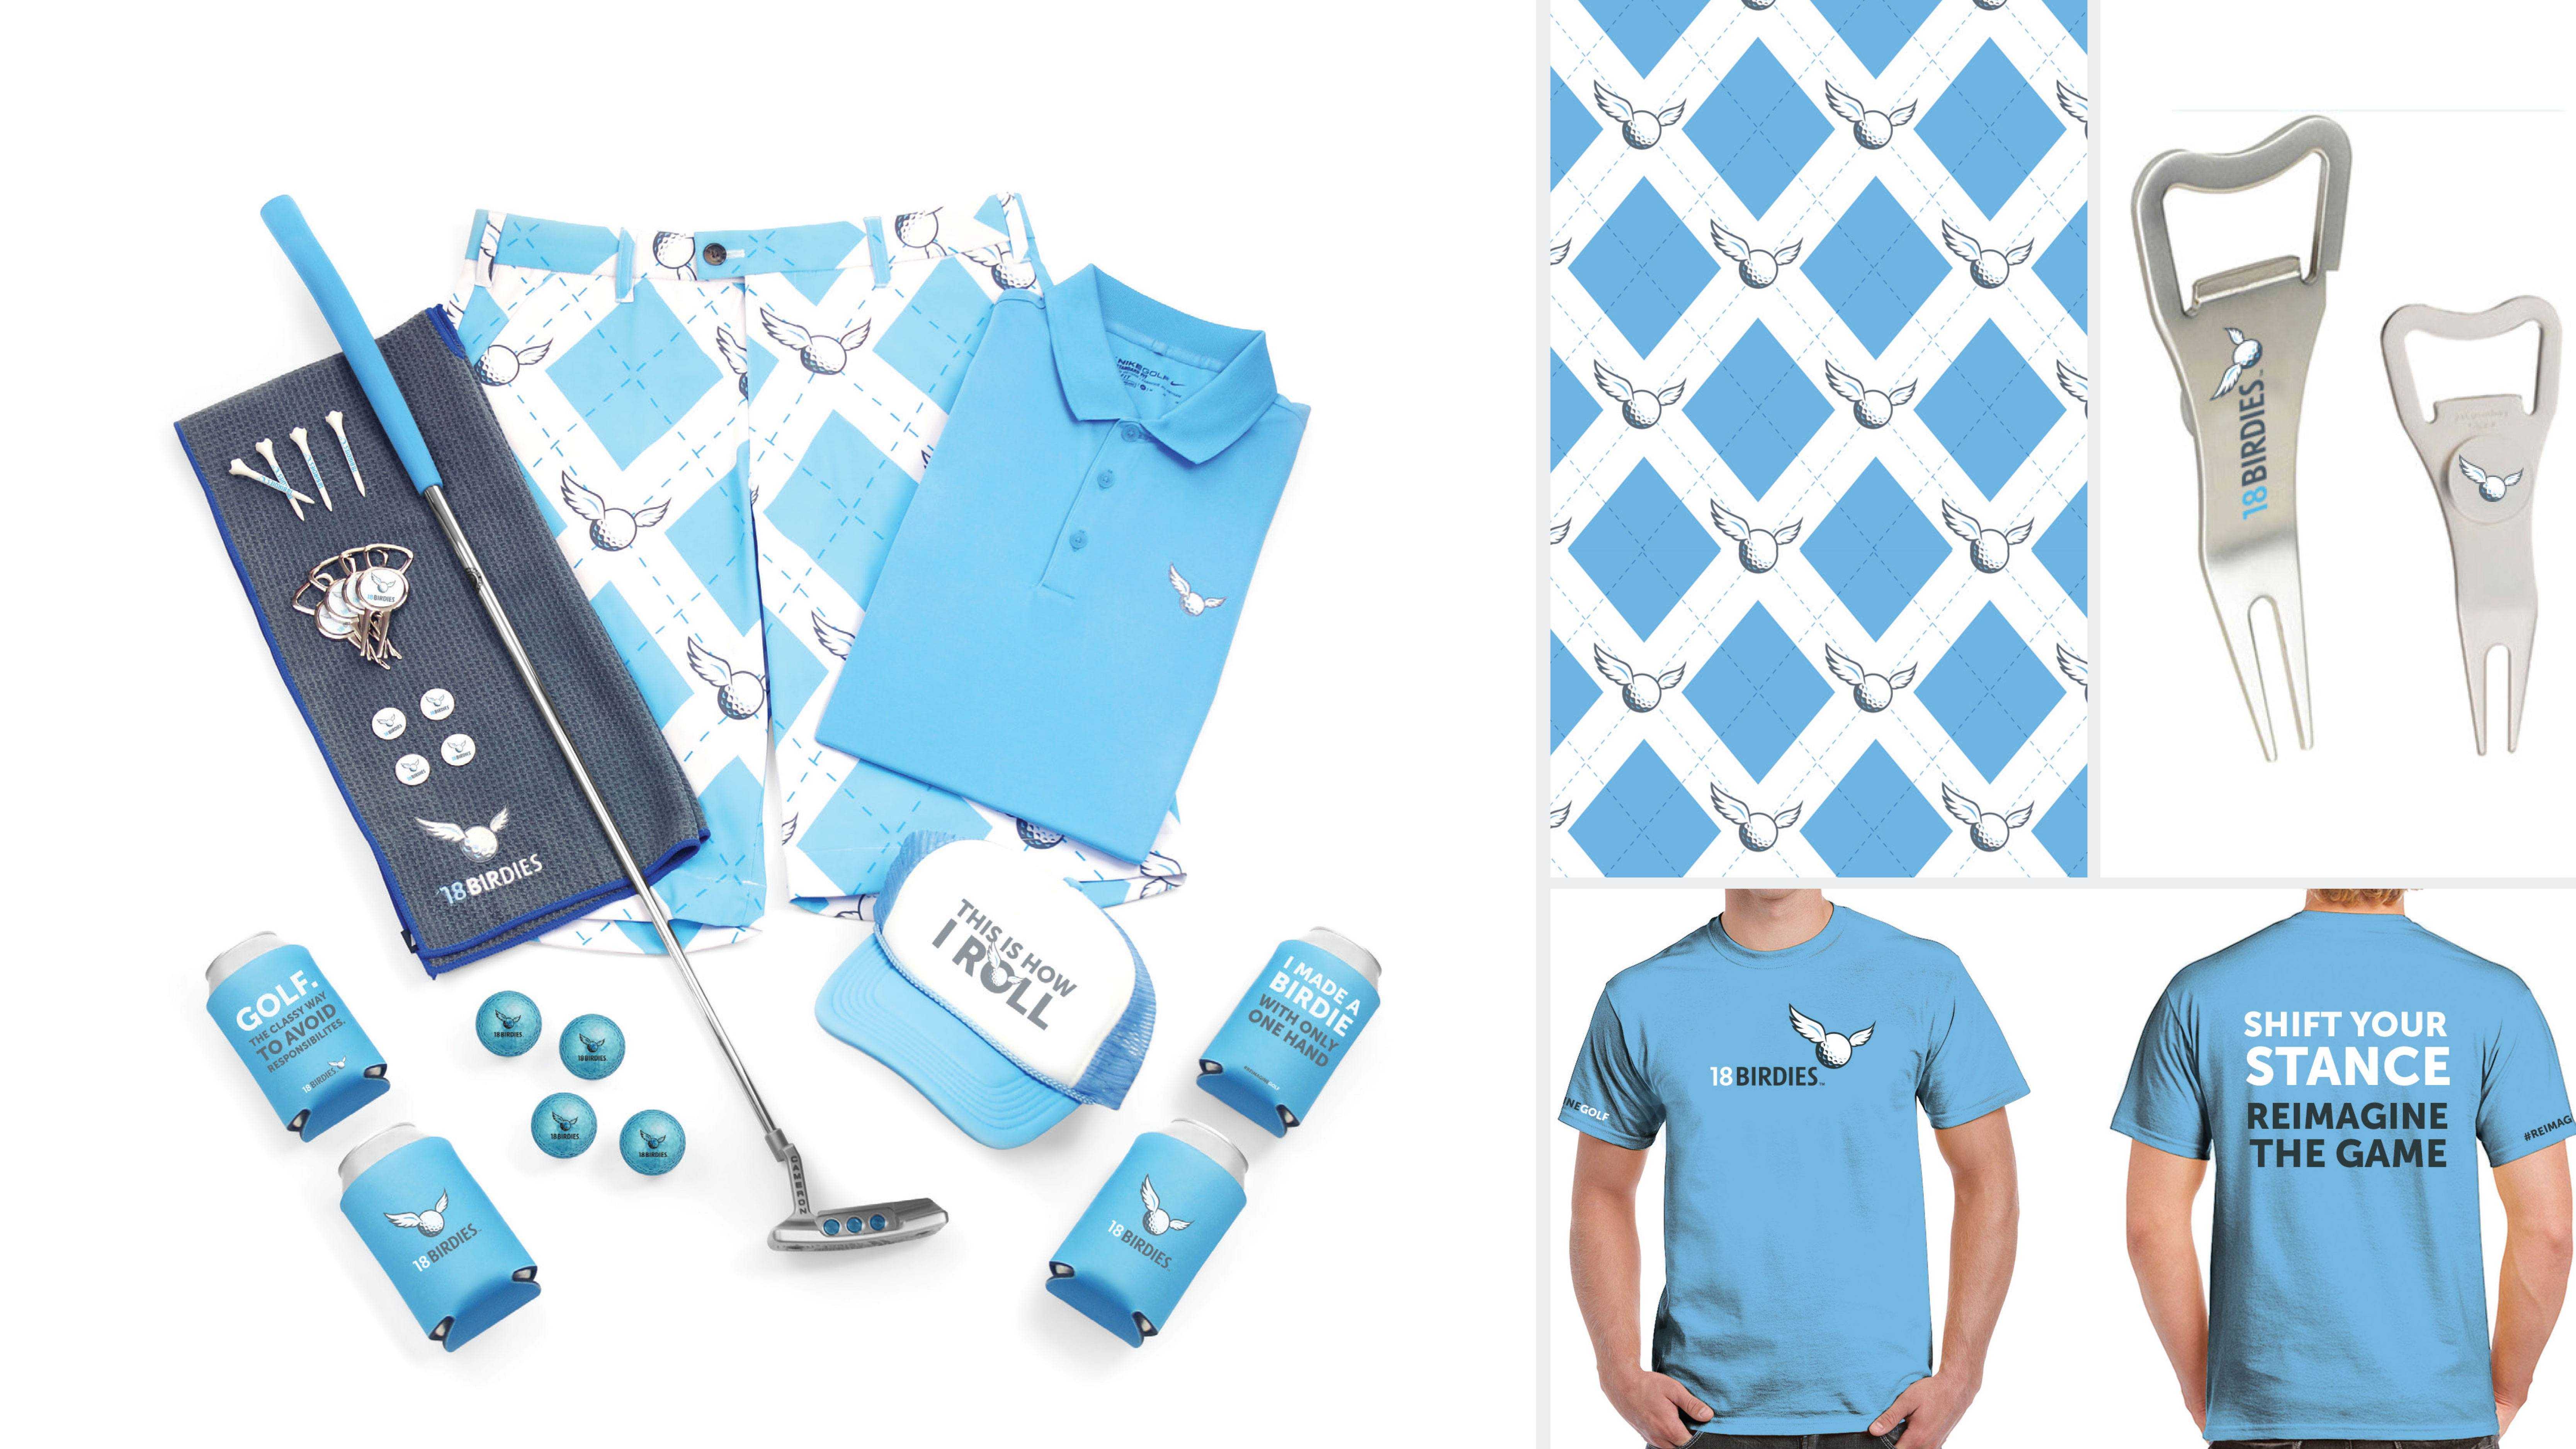 18Birdies apparel and swag examples in a grid